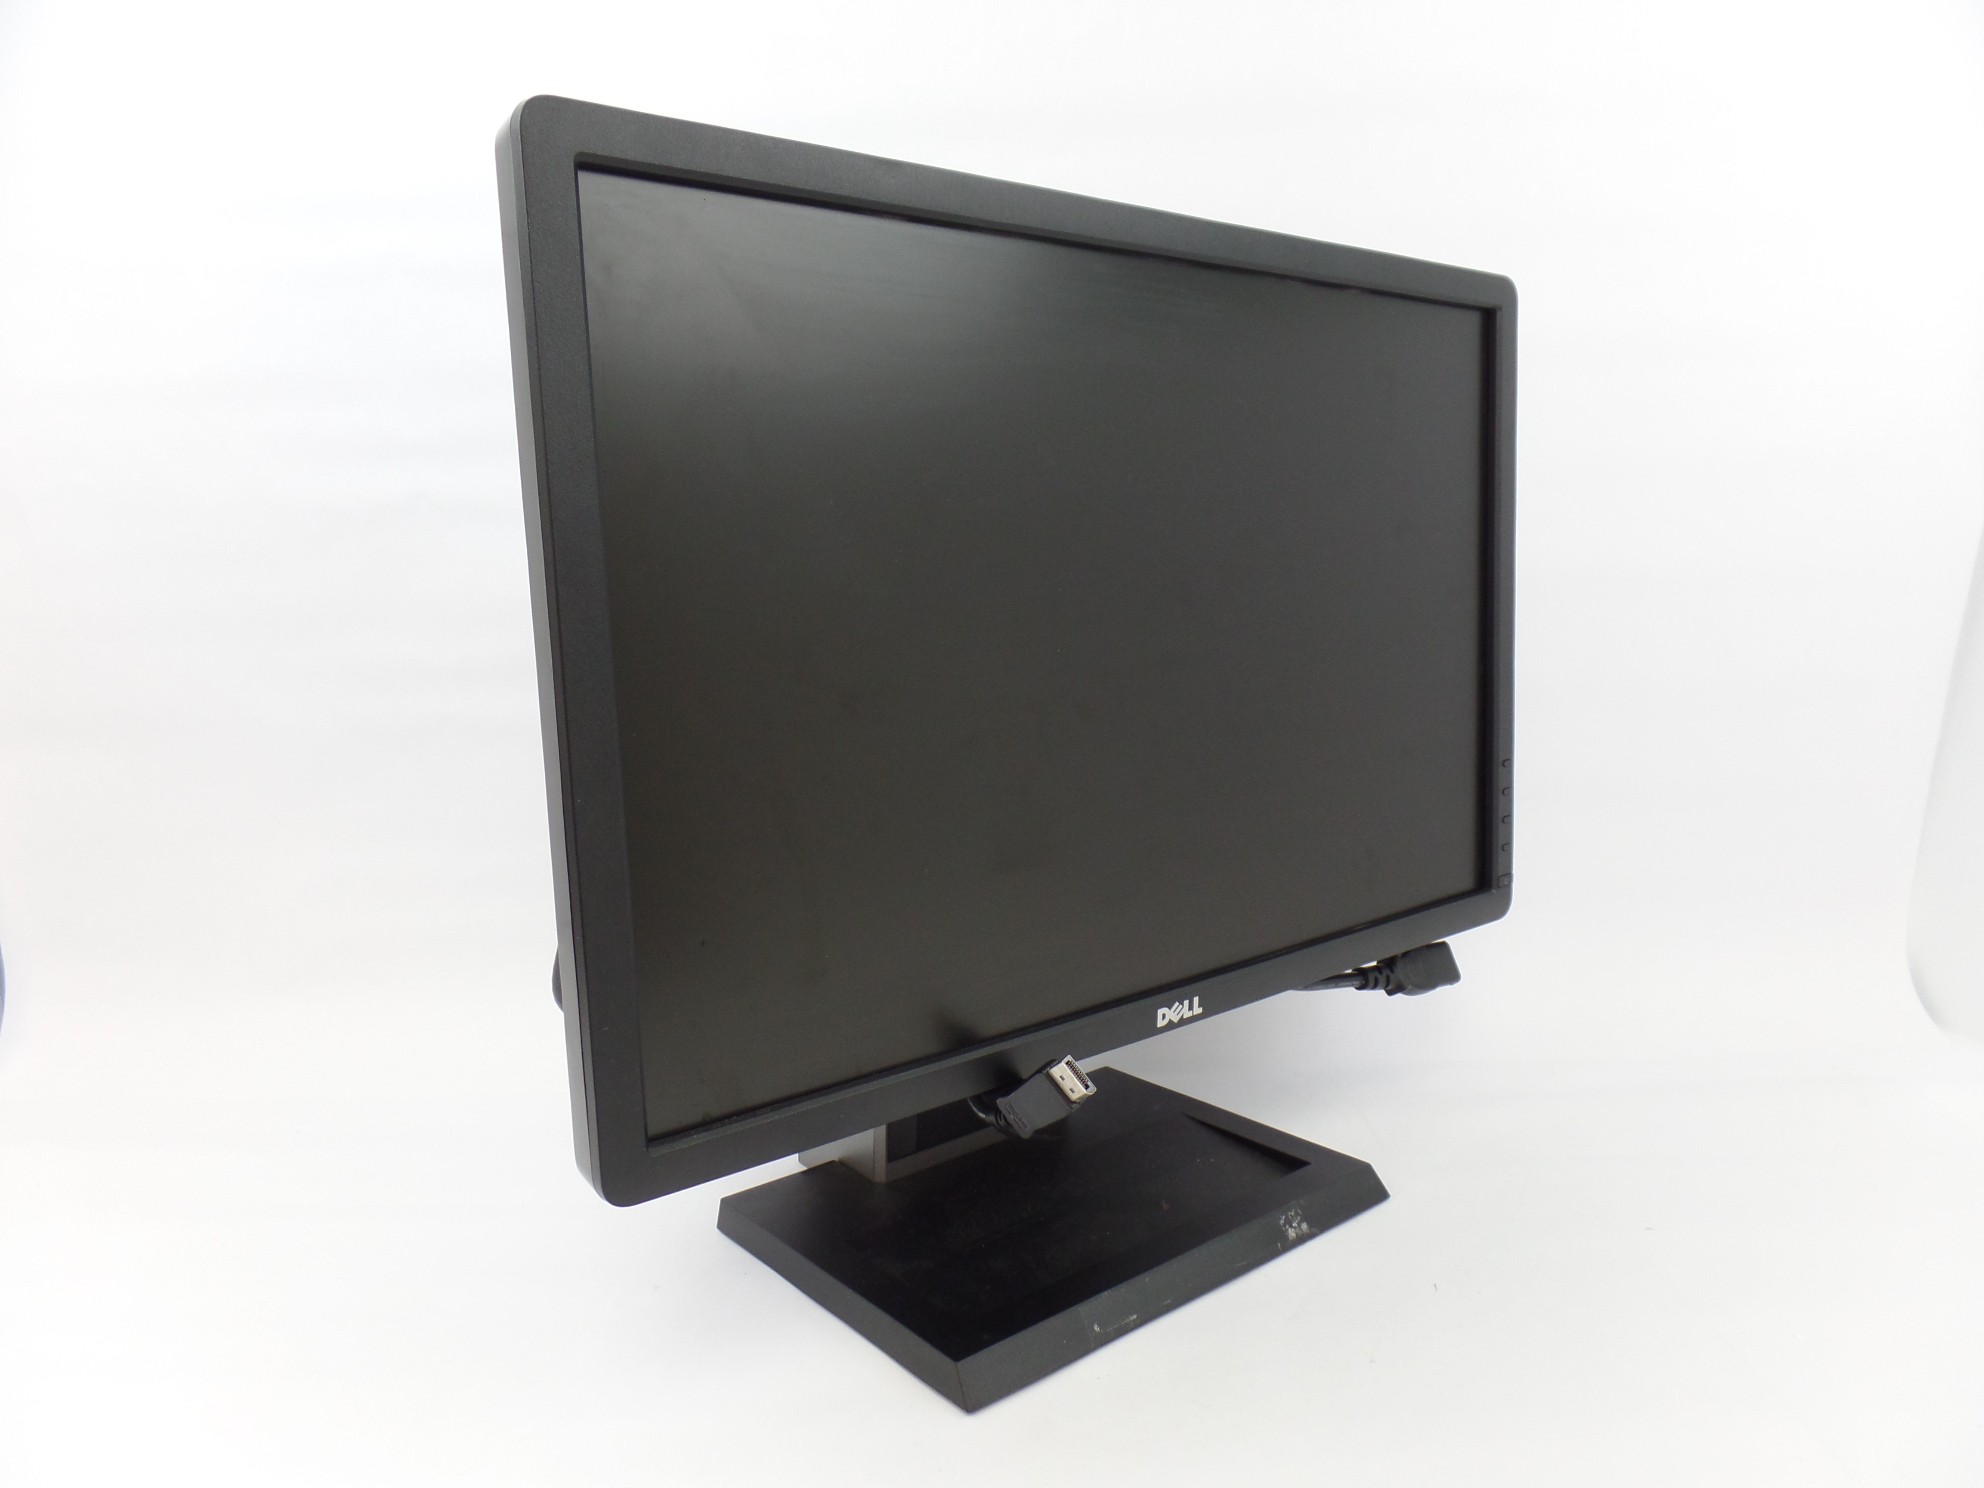 Dell Optiplex 780 790 990 USFF All-in-One Stand + P2213T 22" 1680x1050 Monitor